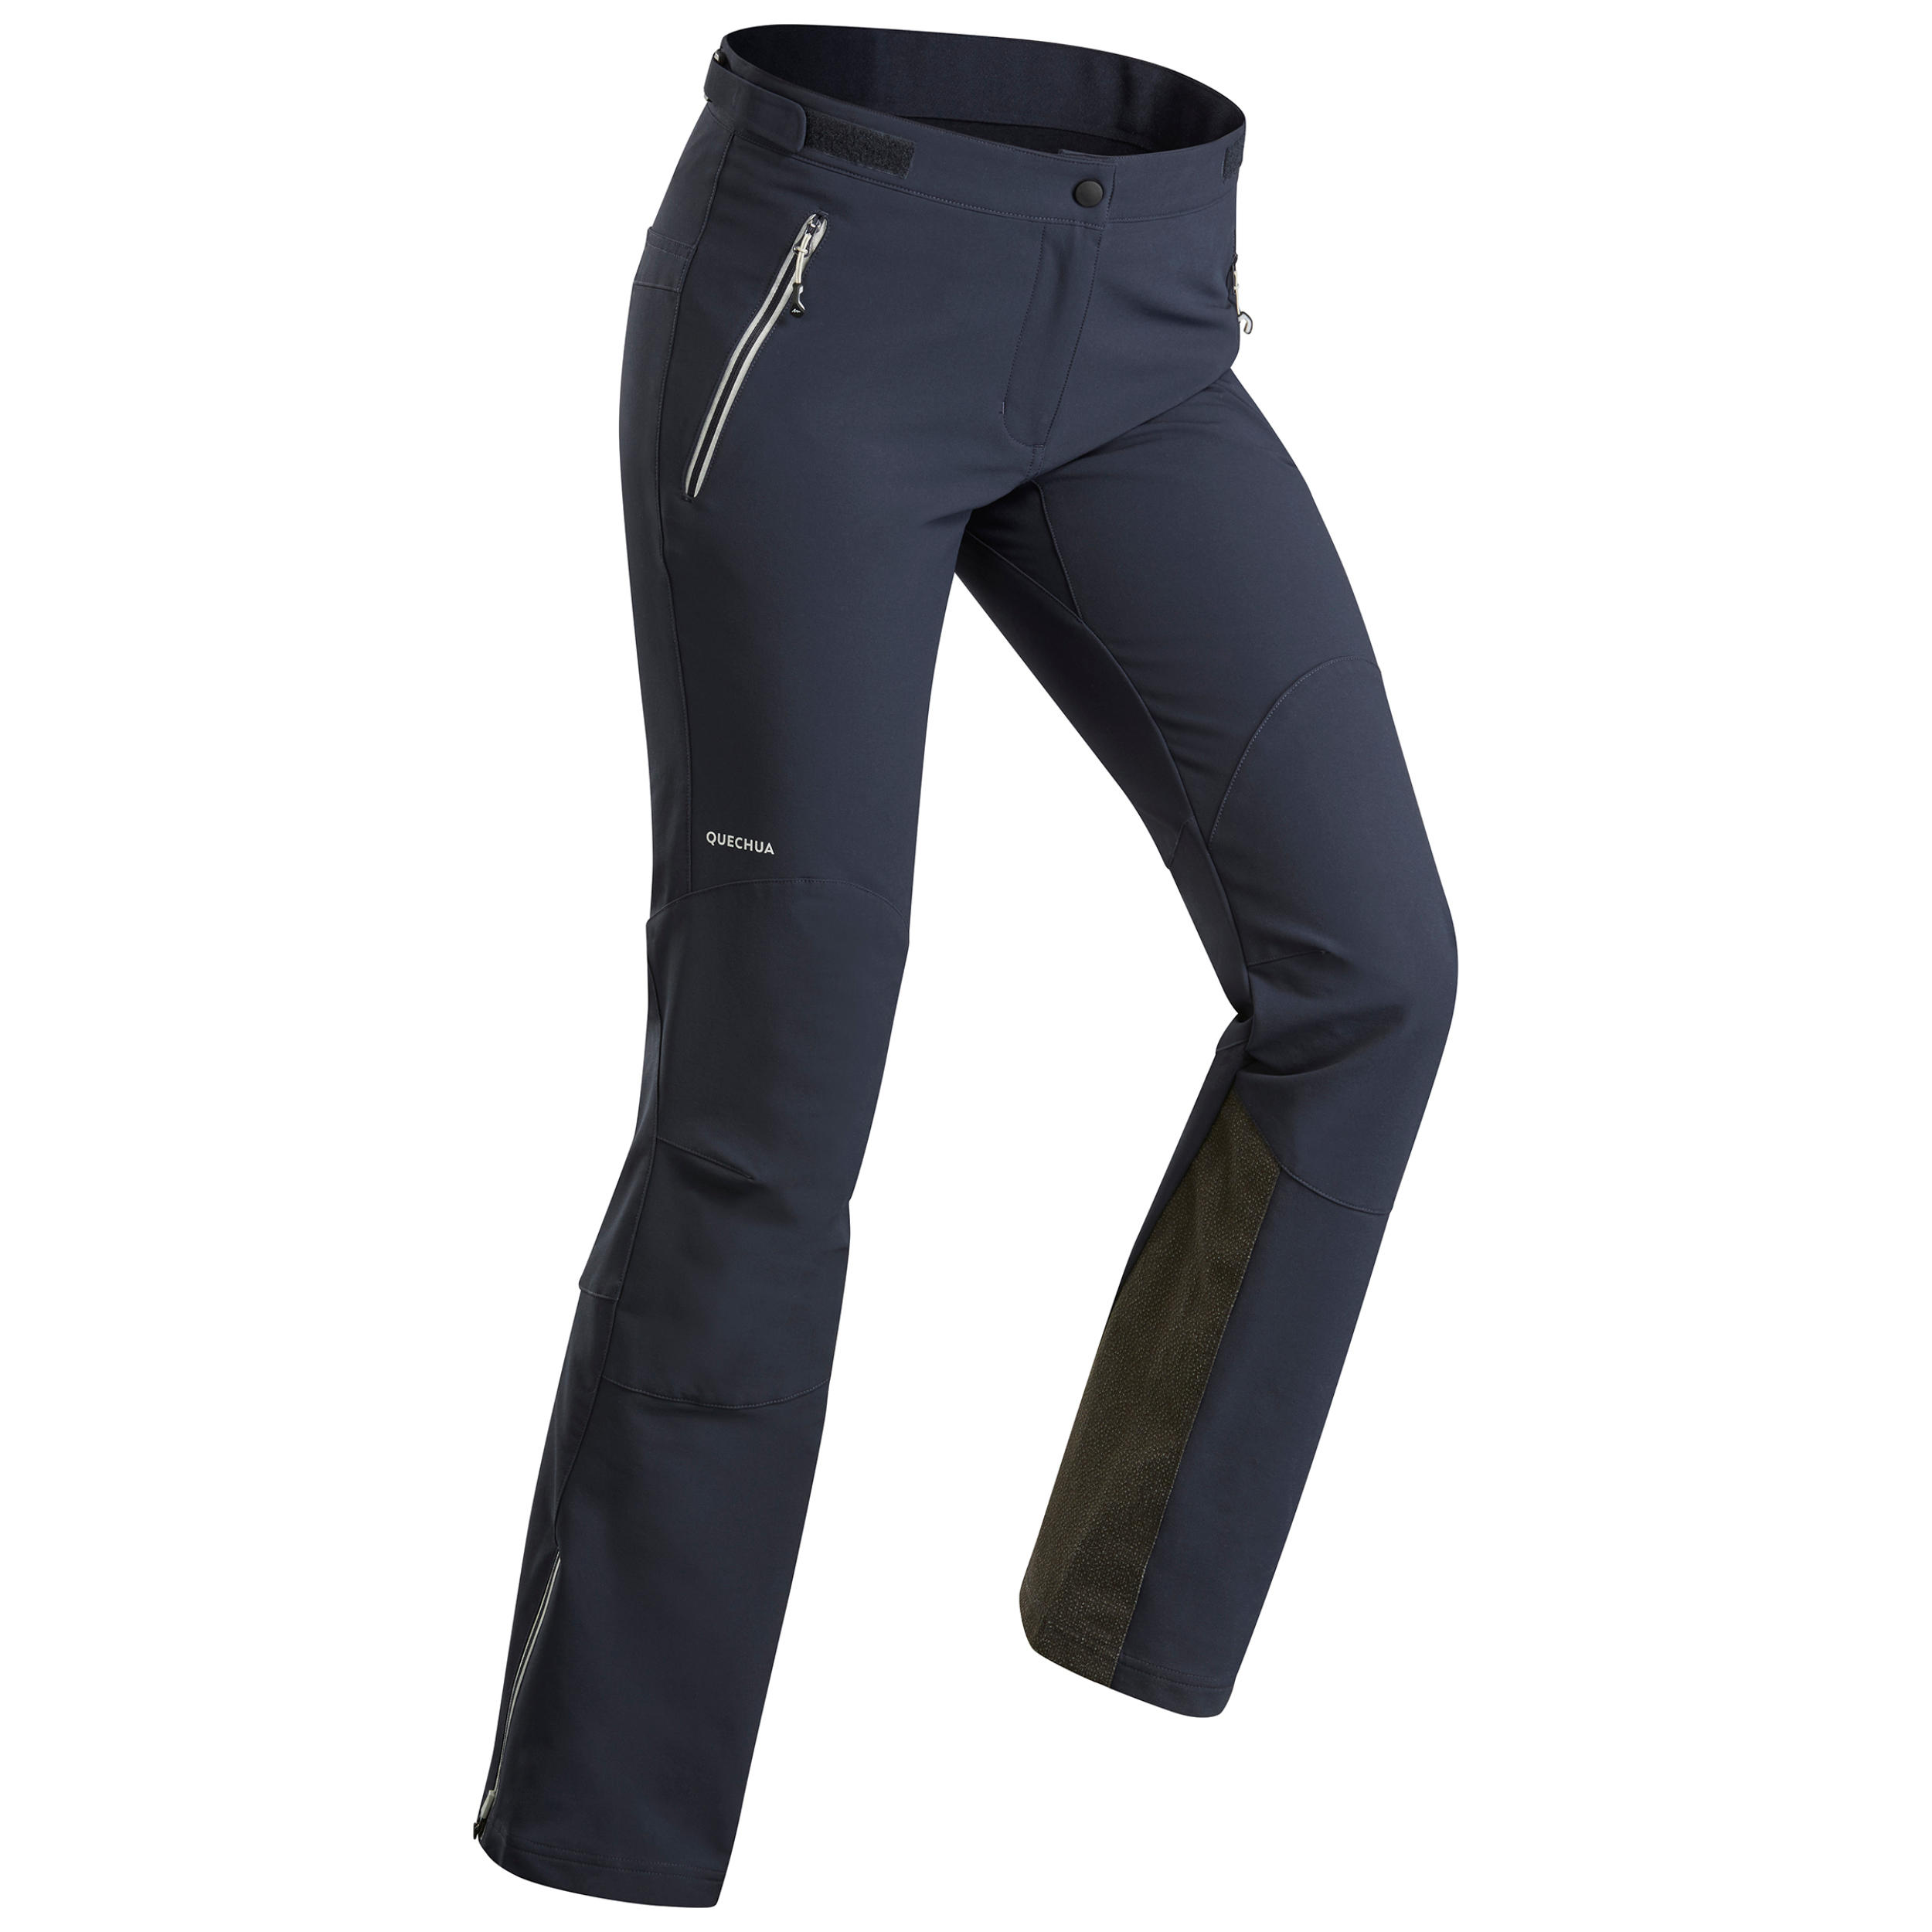 Decathlon Sports India - Our hiker-designers have eco-designed these NH500  Imper waterproof over-trousers for your hikes on lowlands or on the coast.  An added bonus in case of rain!. Slipped into the